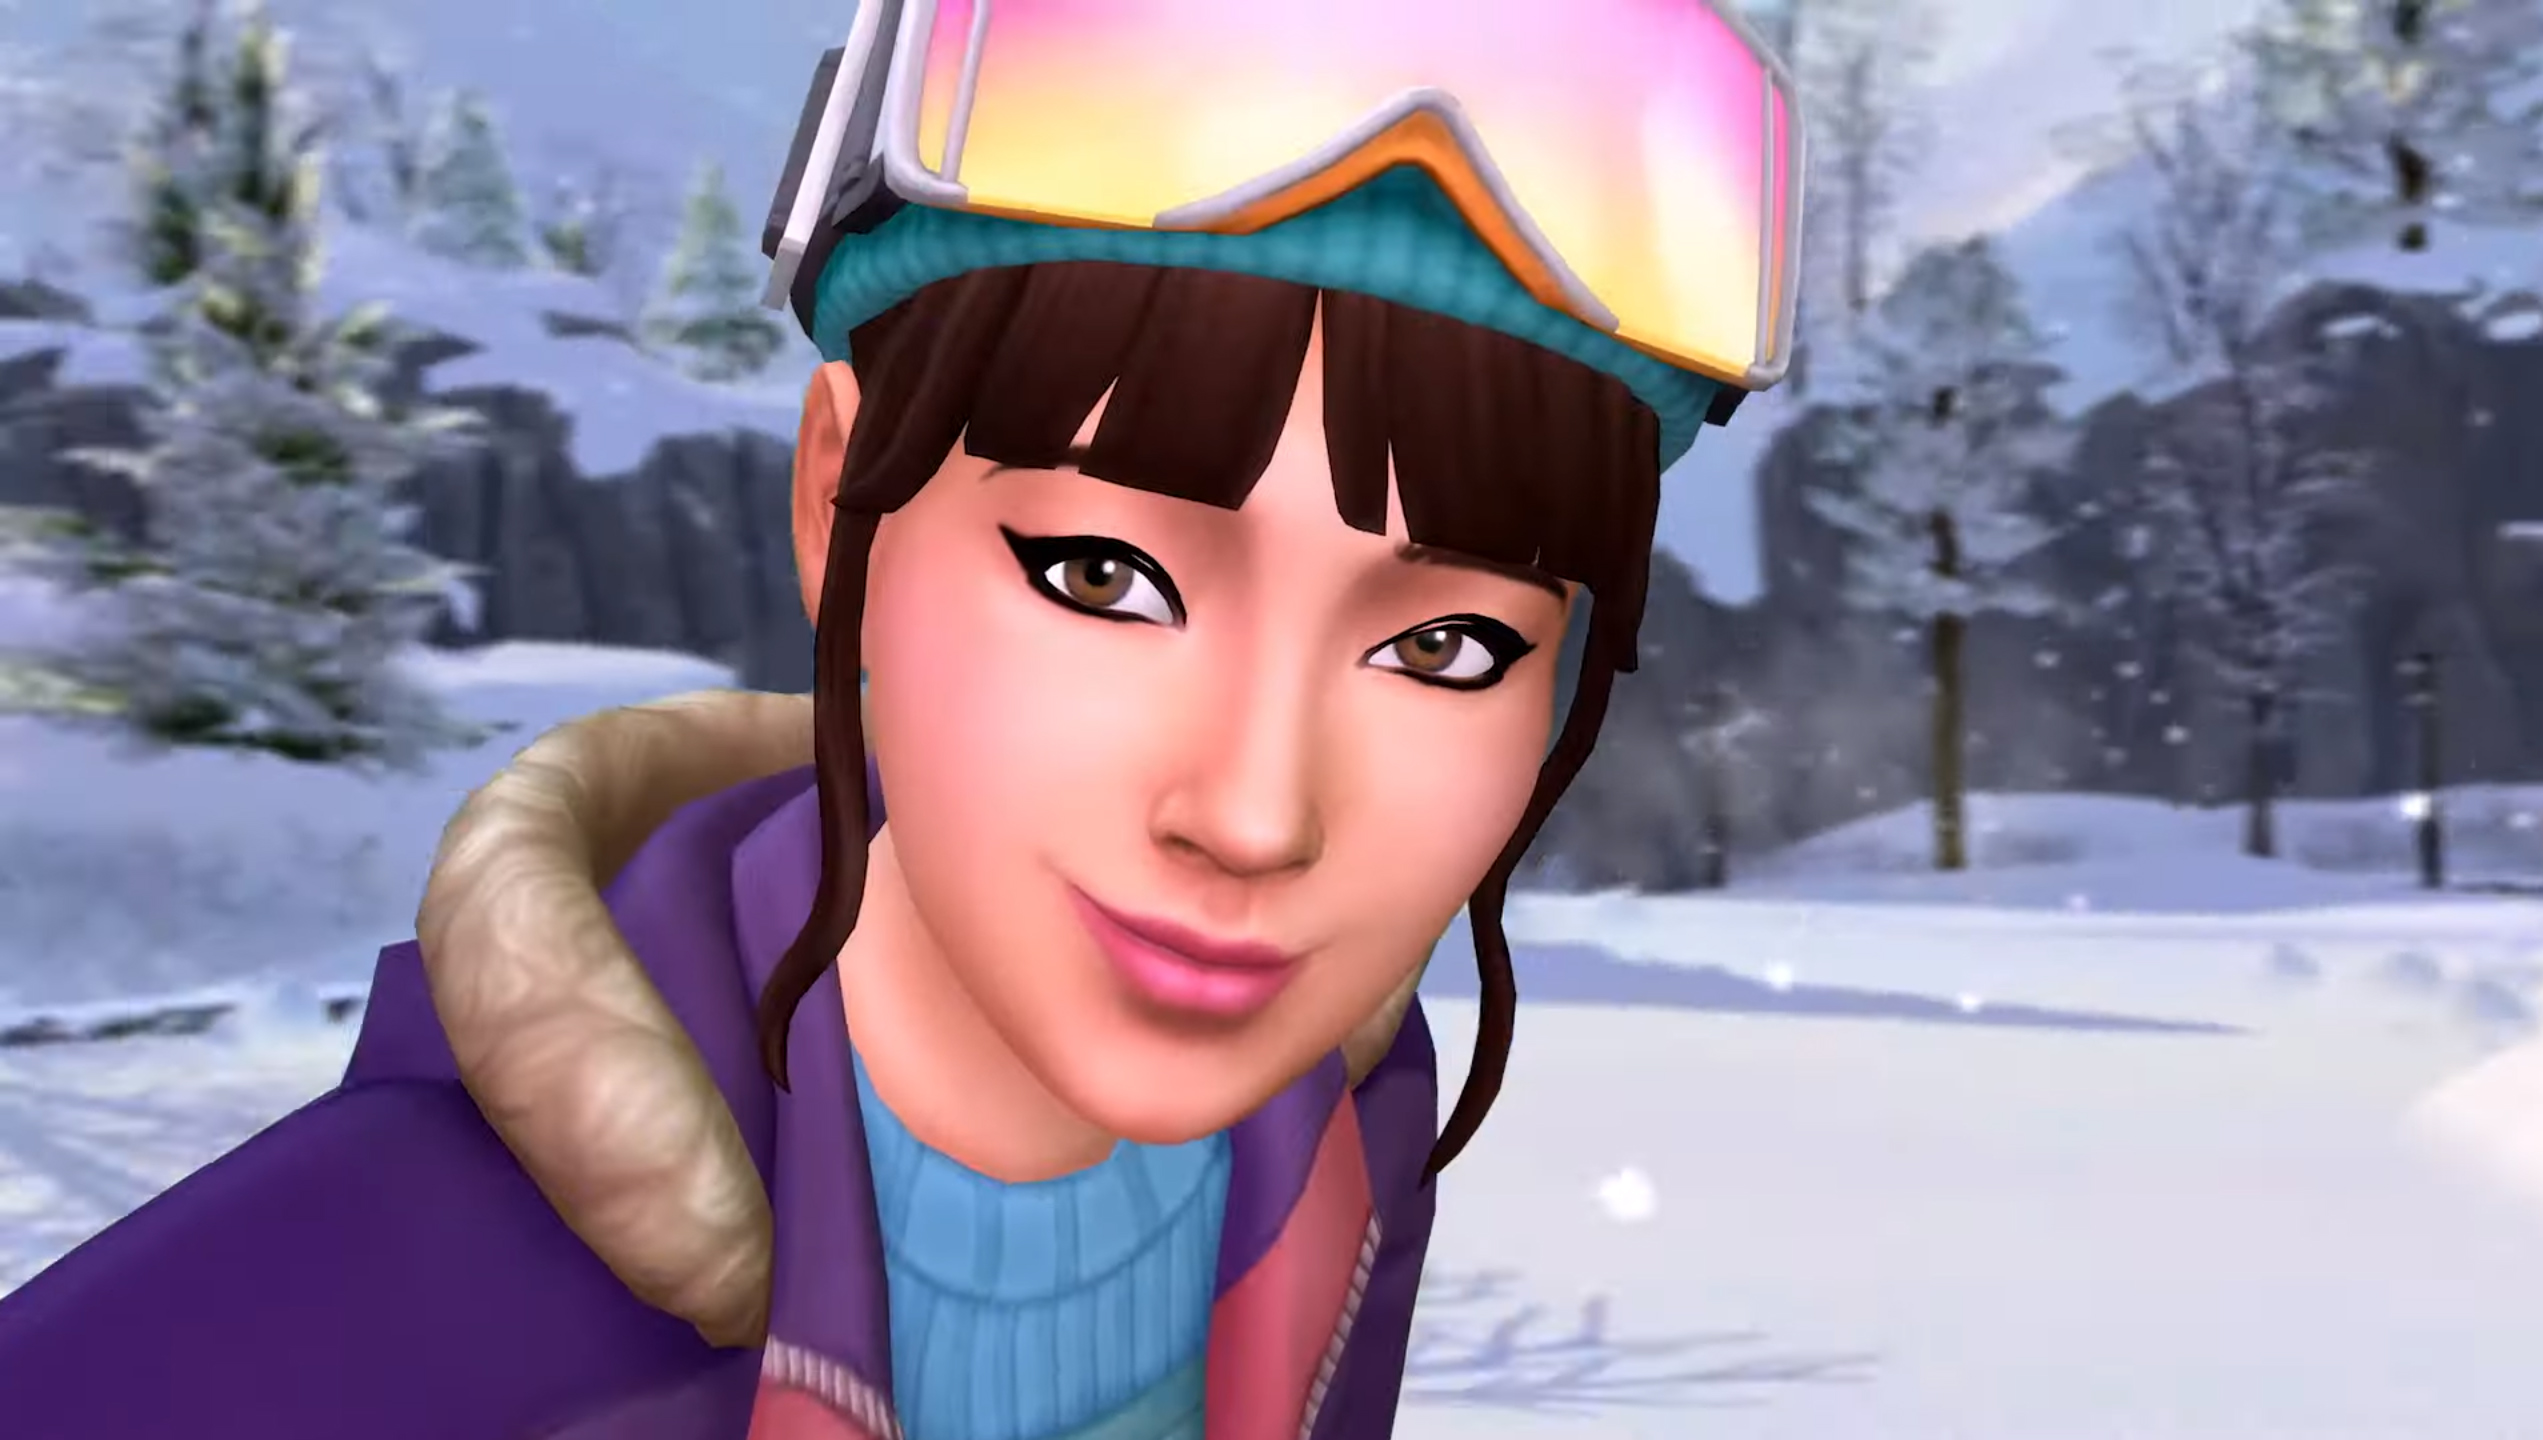 The Sims 4 Snowy Escape - a snowboarder poses in winter